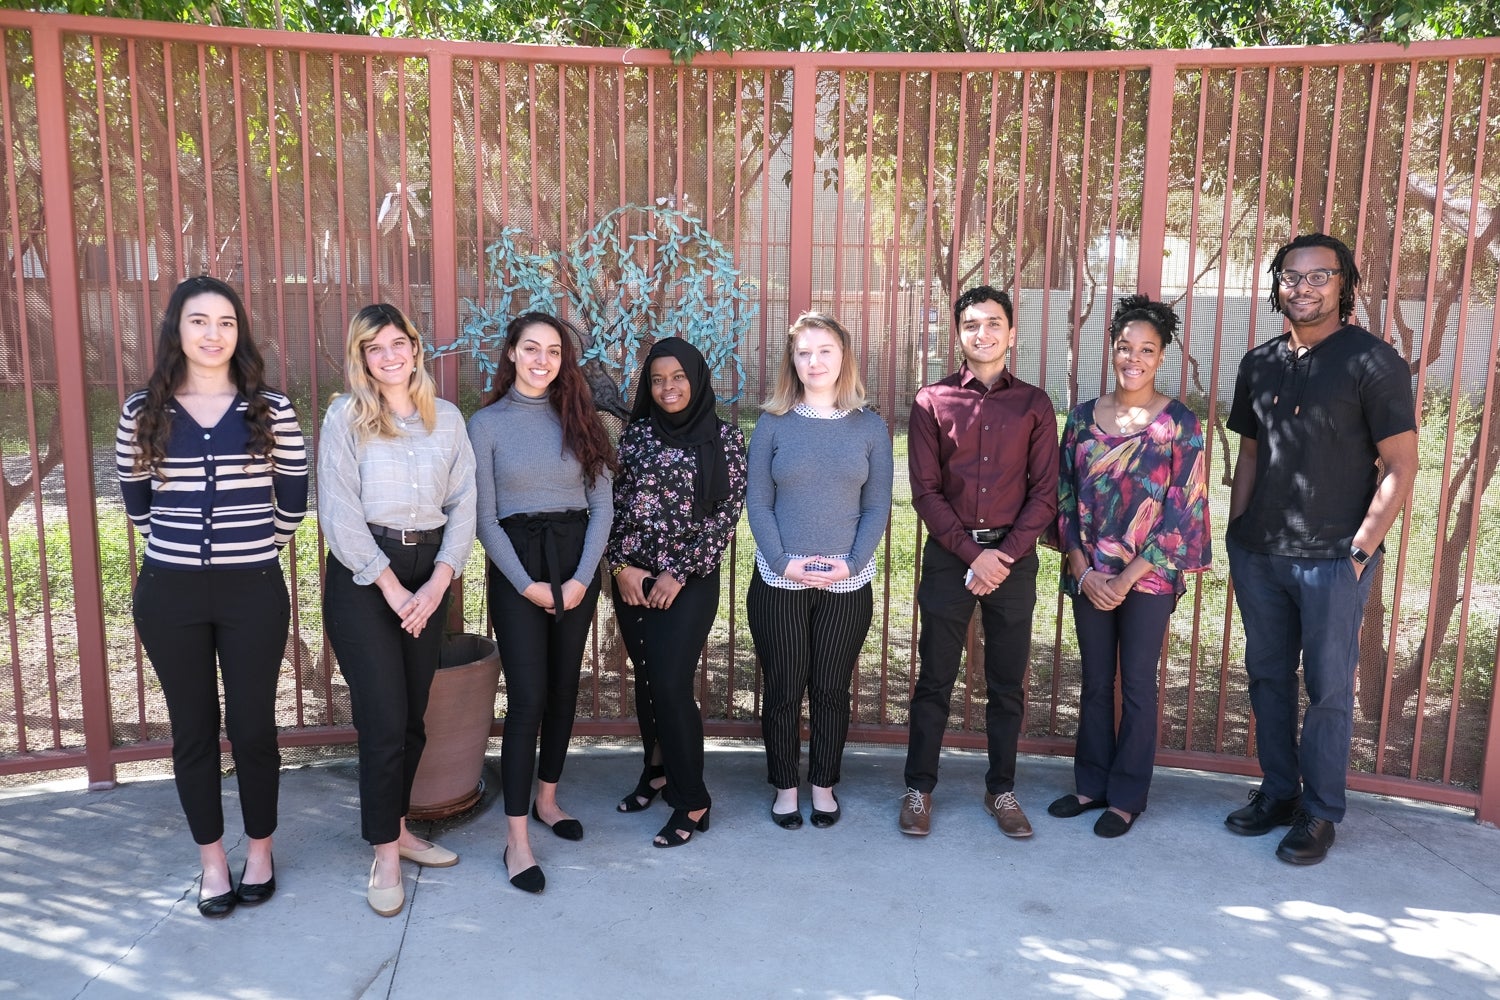 Members of Public Allies Arizona's first Tucson class stand in front of a gate outside.